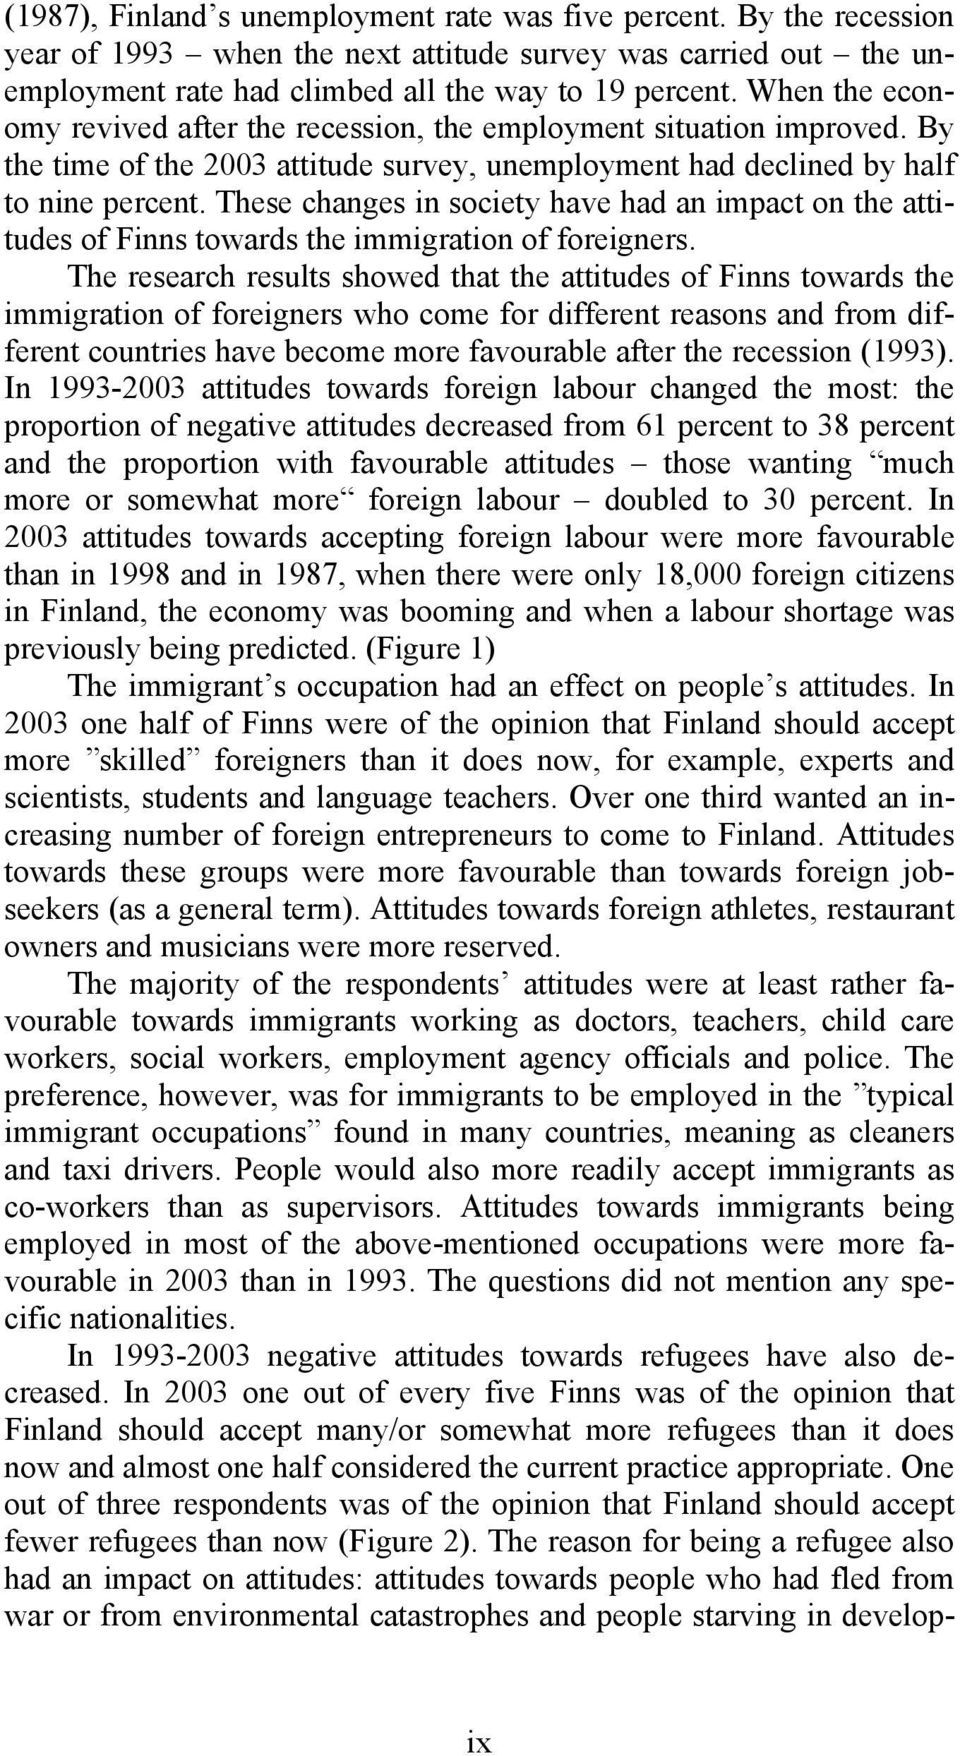 These changes in society have had an impact on the attitudes of Finns towards the immigration of foreigners.